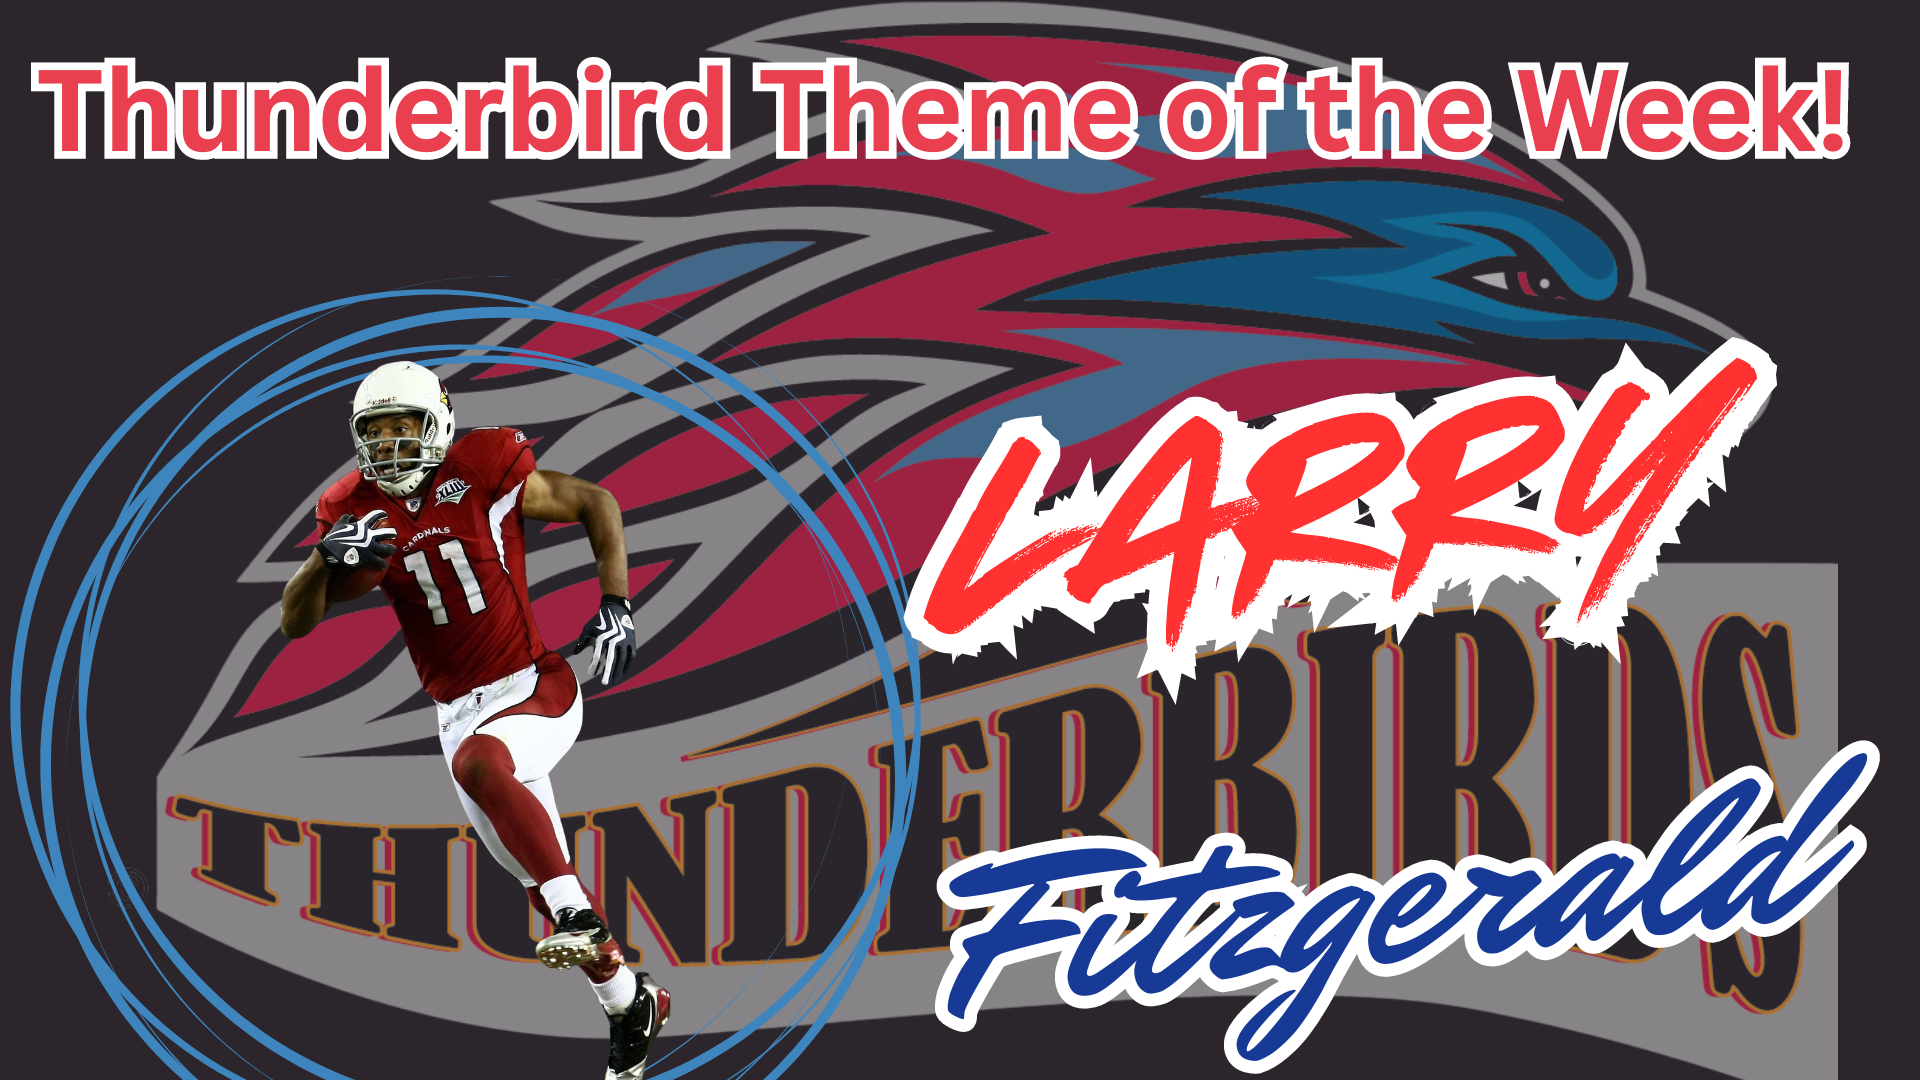 Thunderbird Theme of the Week...Featuring Larry Fitzgerald